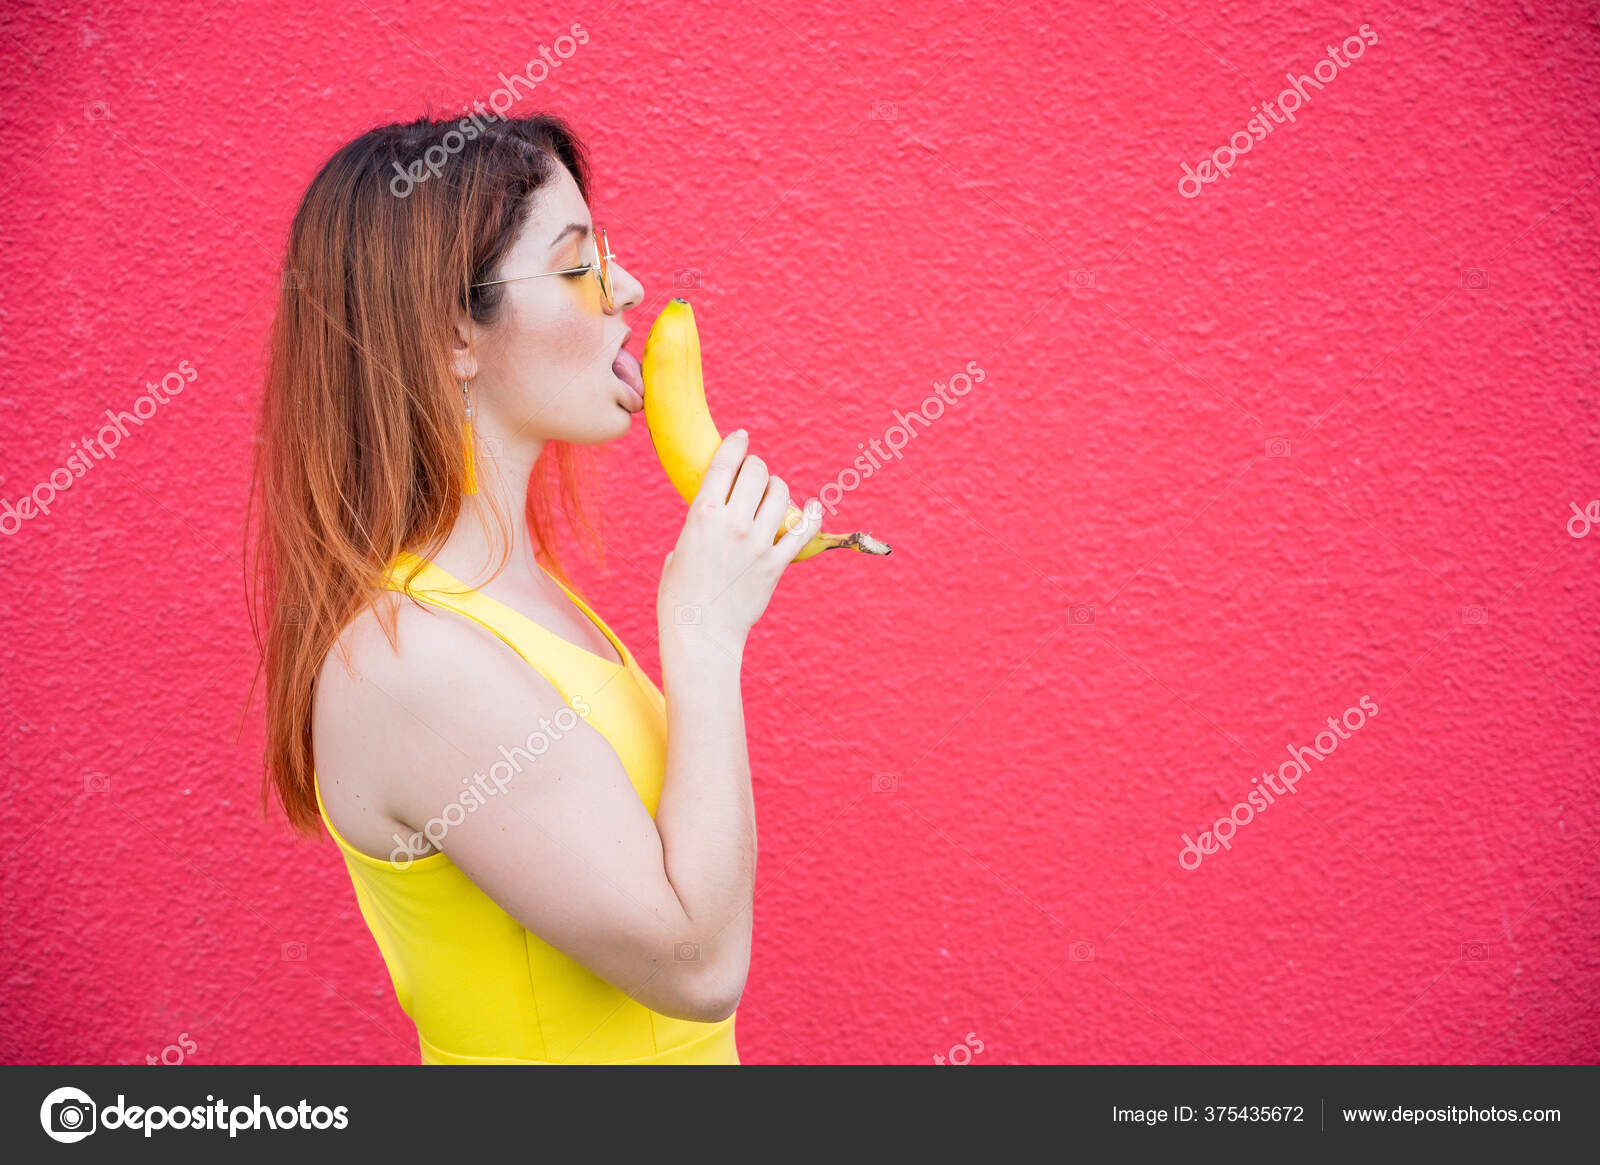 Woman in a yellow dress and glasses erotically licks a banana on a red background